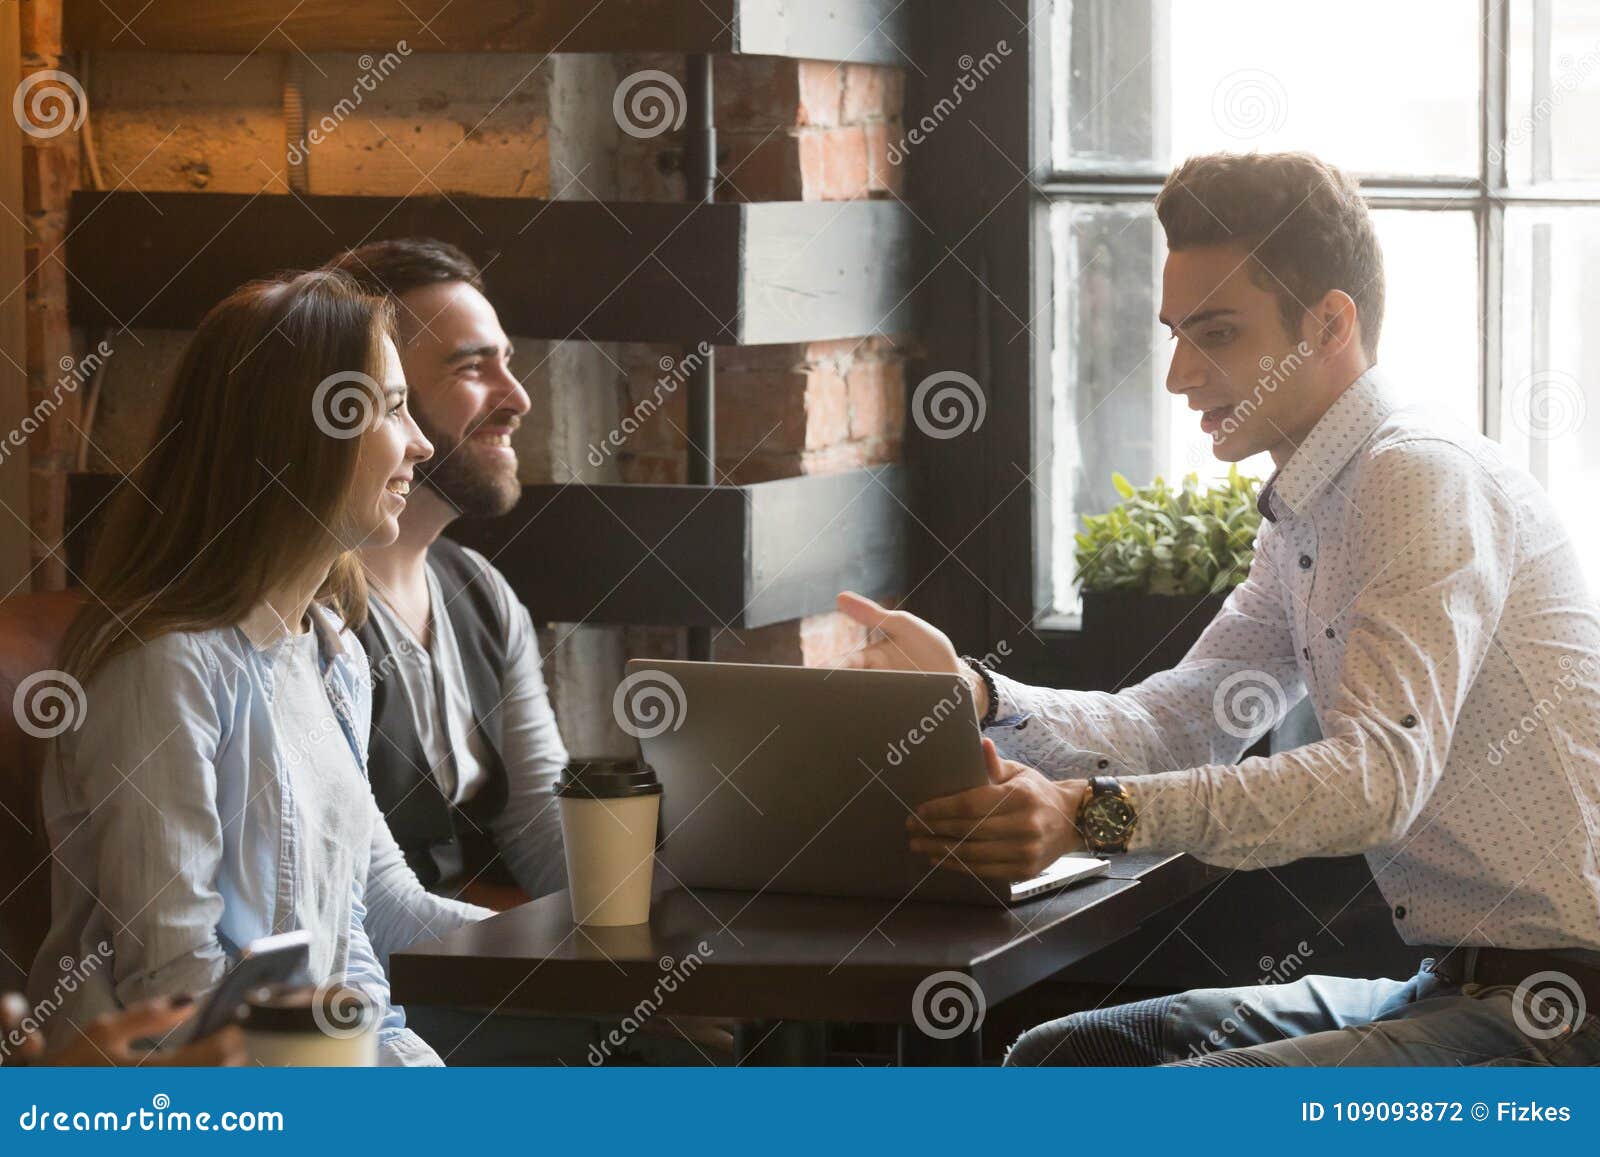 insurance broker or salesman making offer to couple in cafe